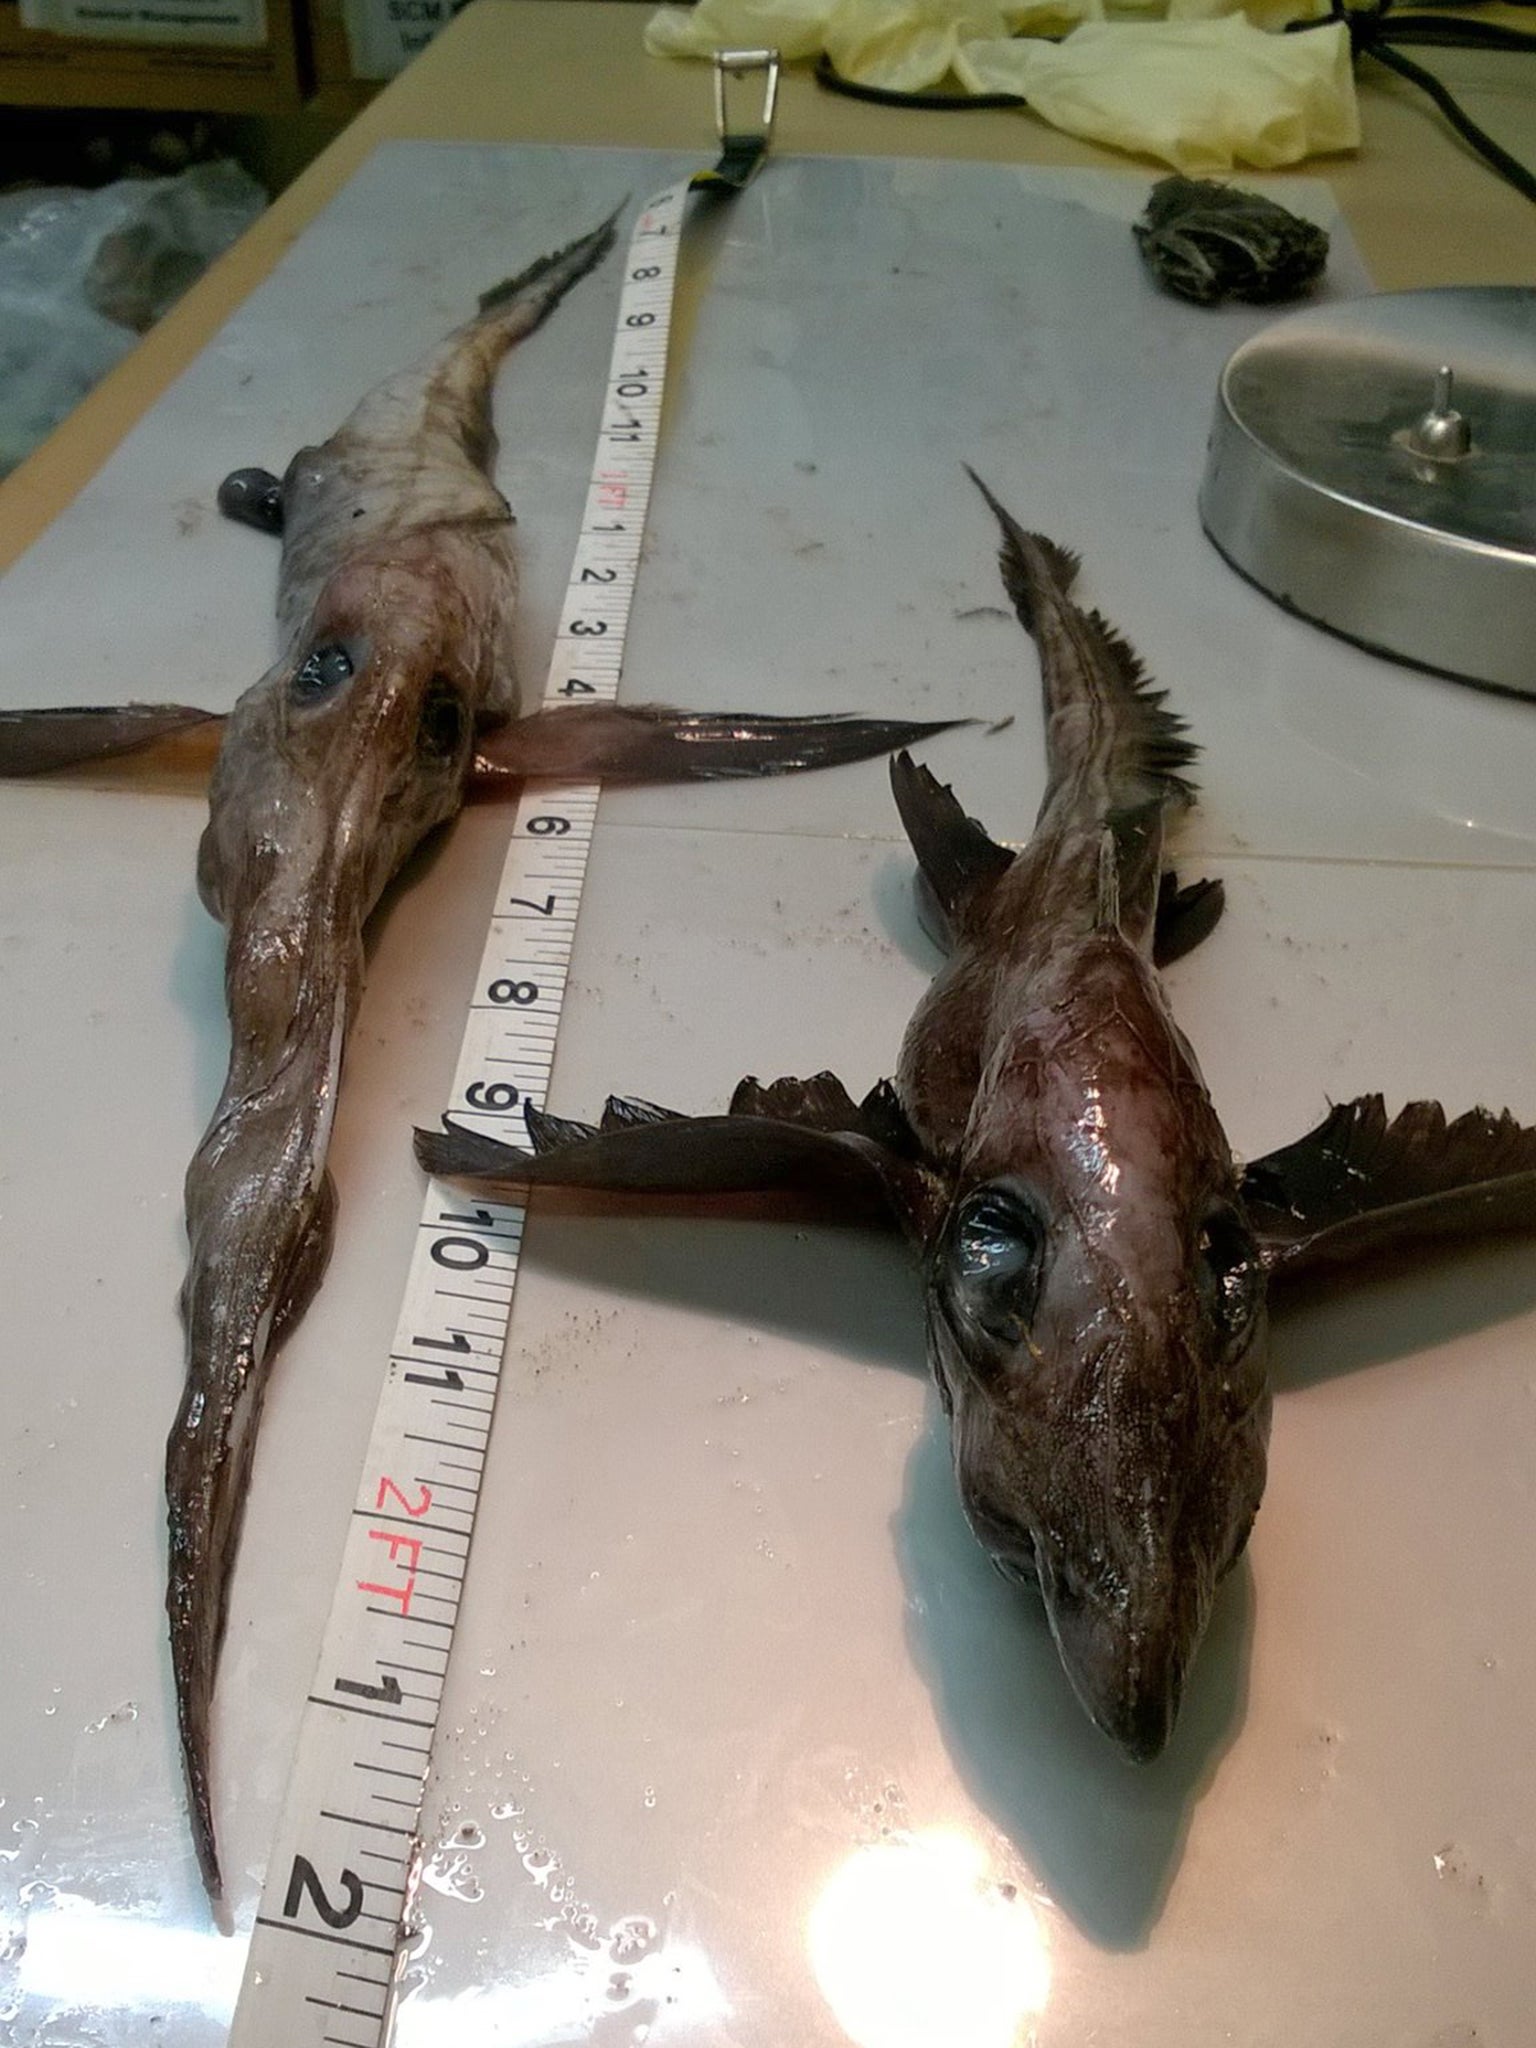 A long-nosed and short nosed Chimaera